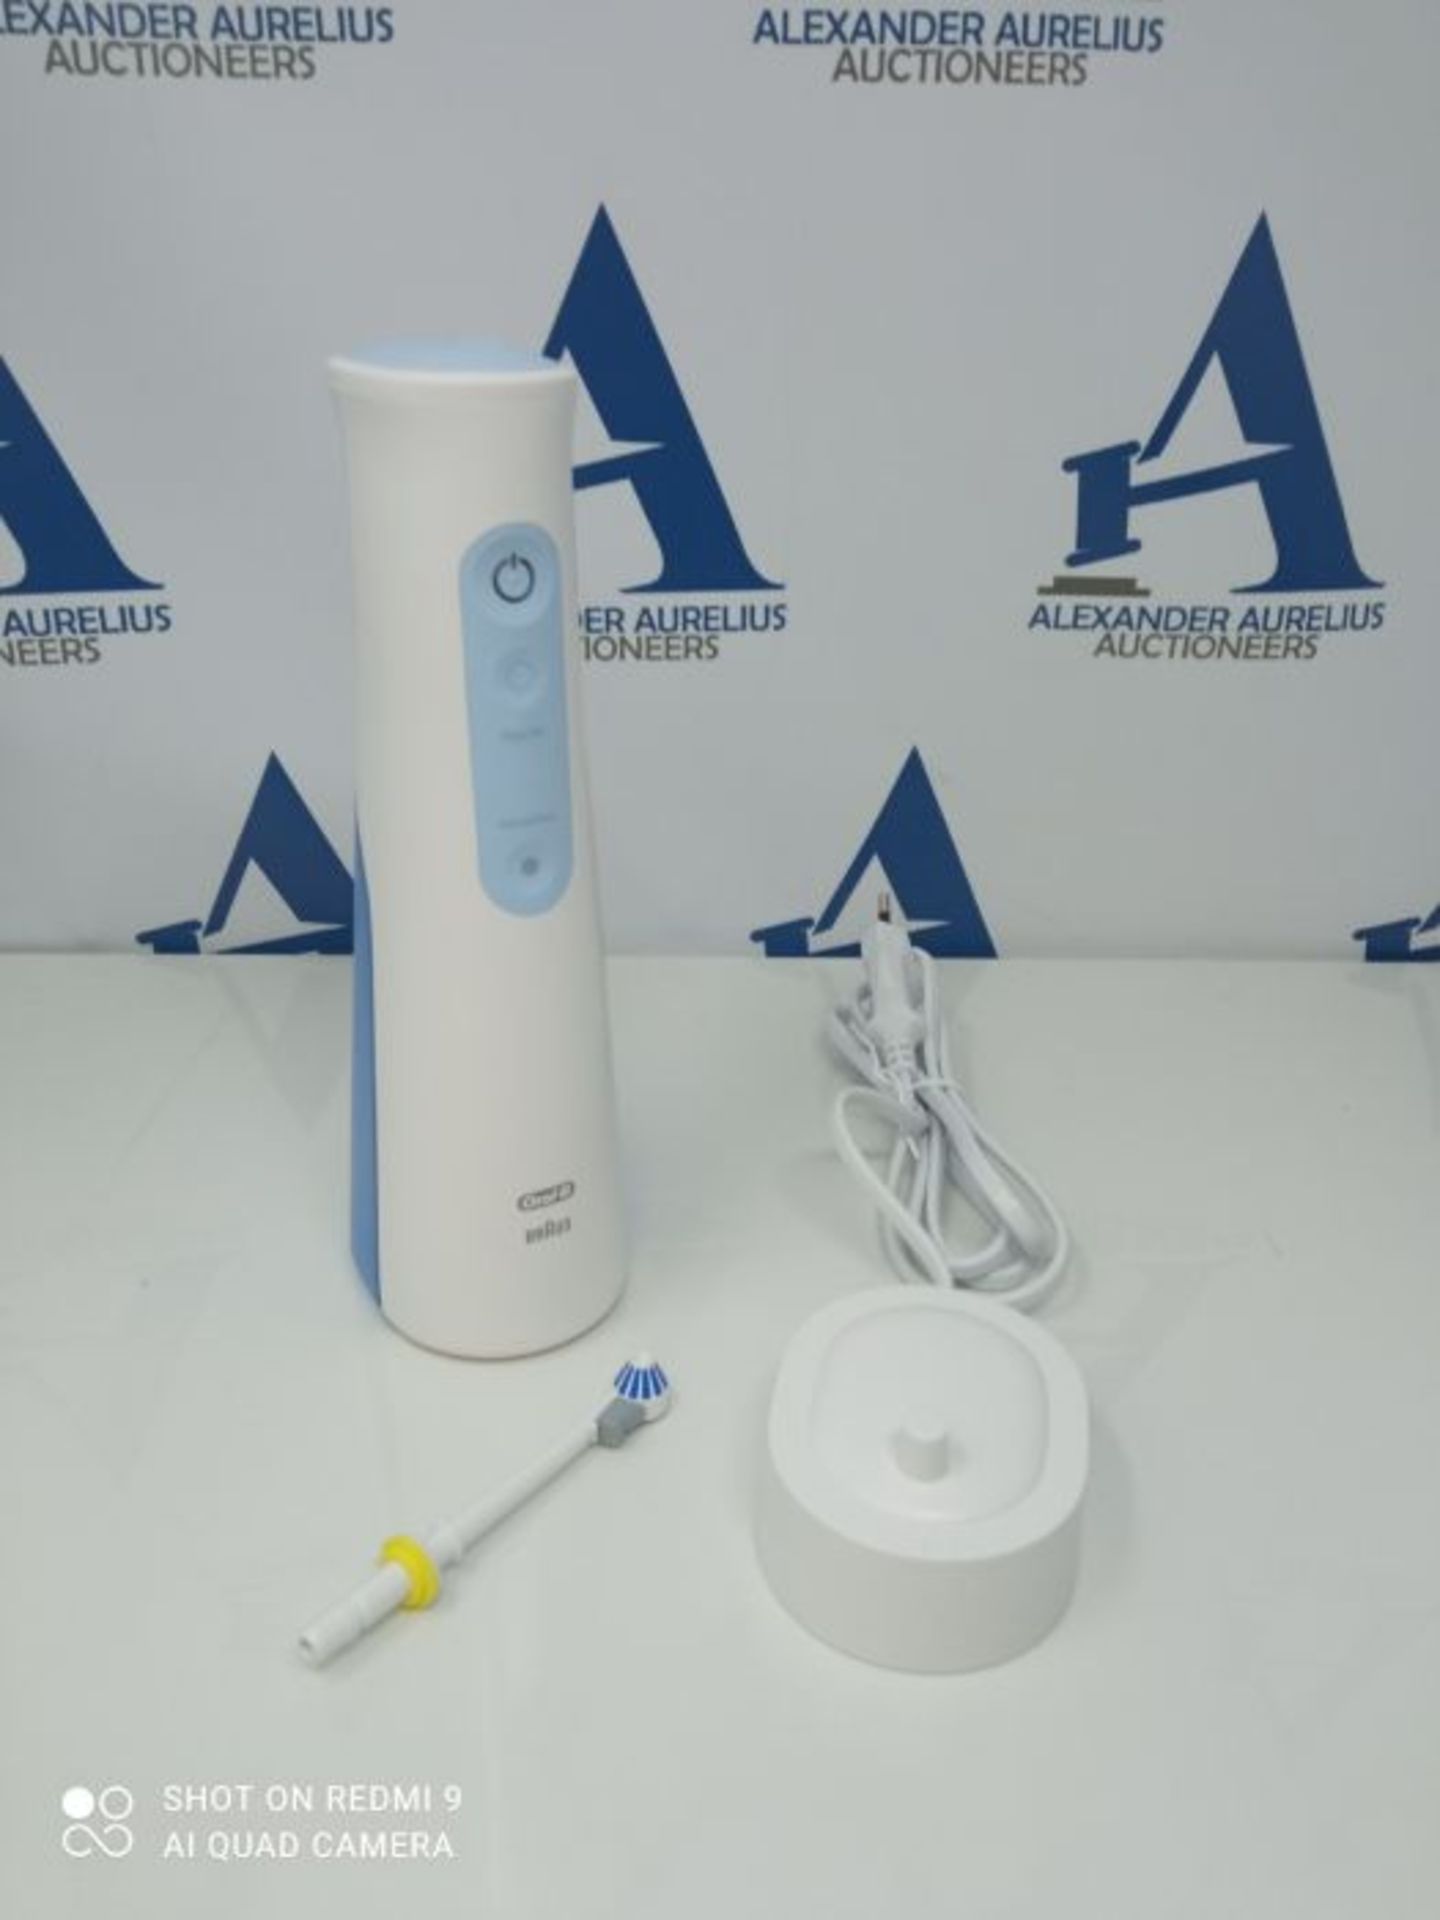 RRP £65.00 ORAL-B Aquacare Waterflosser with Oxyjet Technology - Image 3 of 3